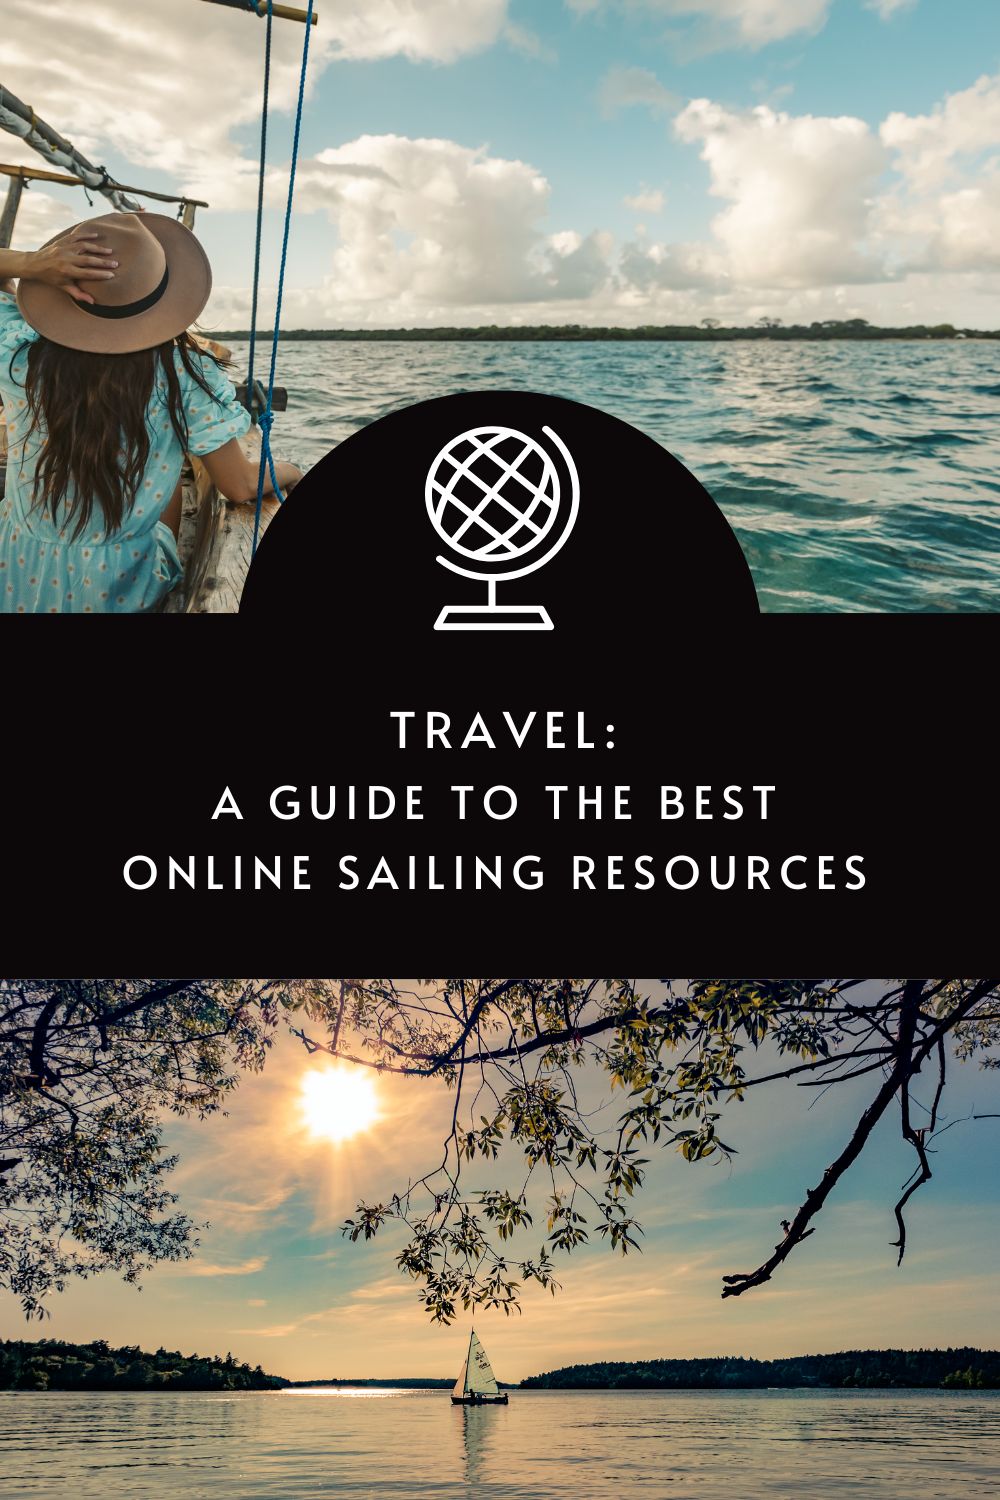 A Guide to the best online sailing resources via @tbookjunkie